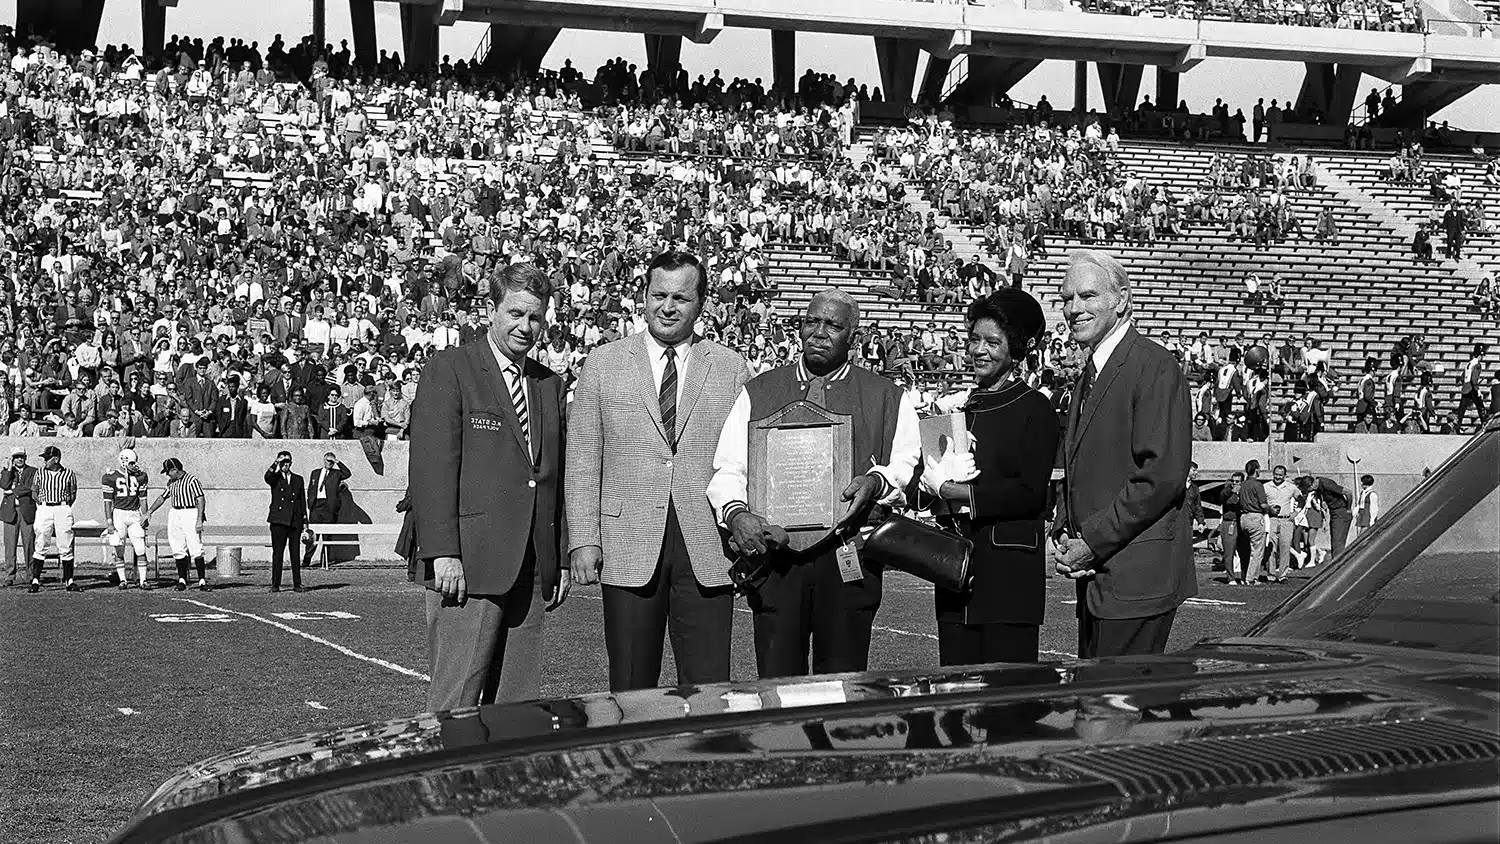 Chester Grant, center, is honored during a halftime event at Carter-Finley Stadium in 1970.